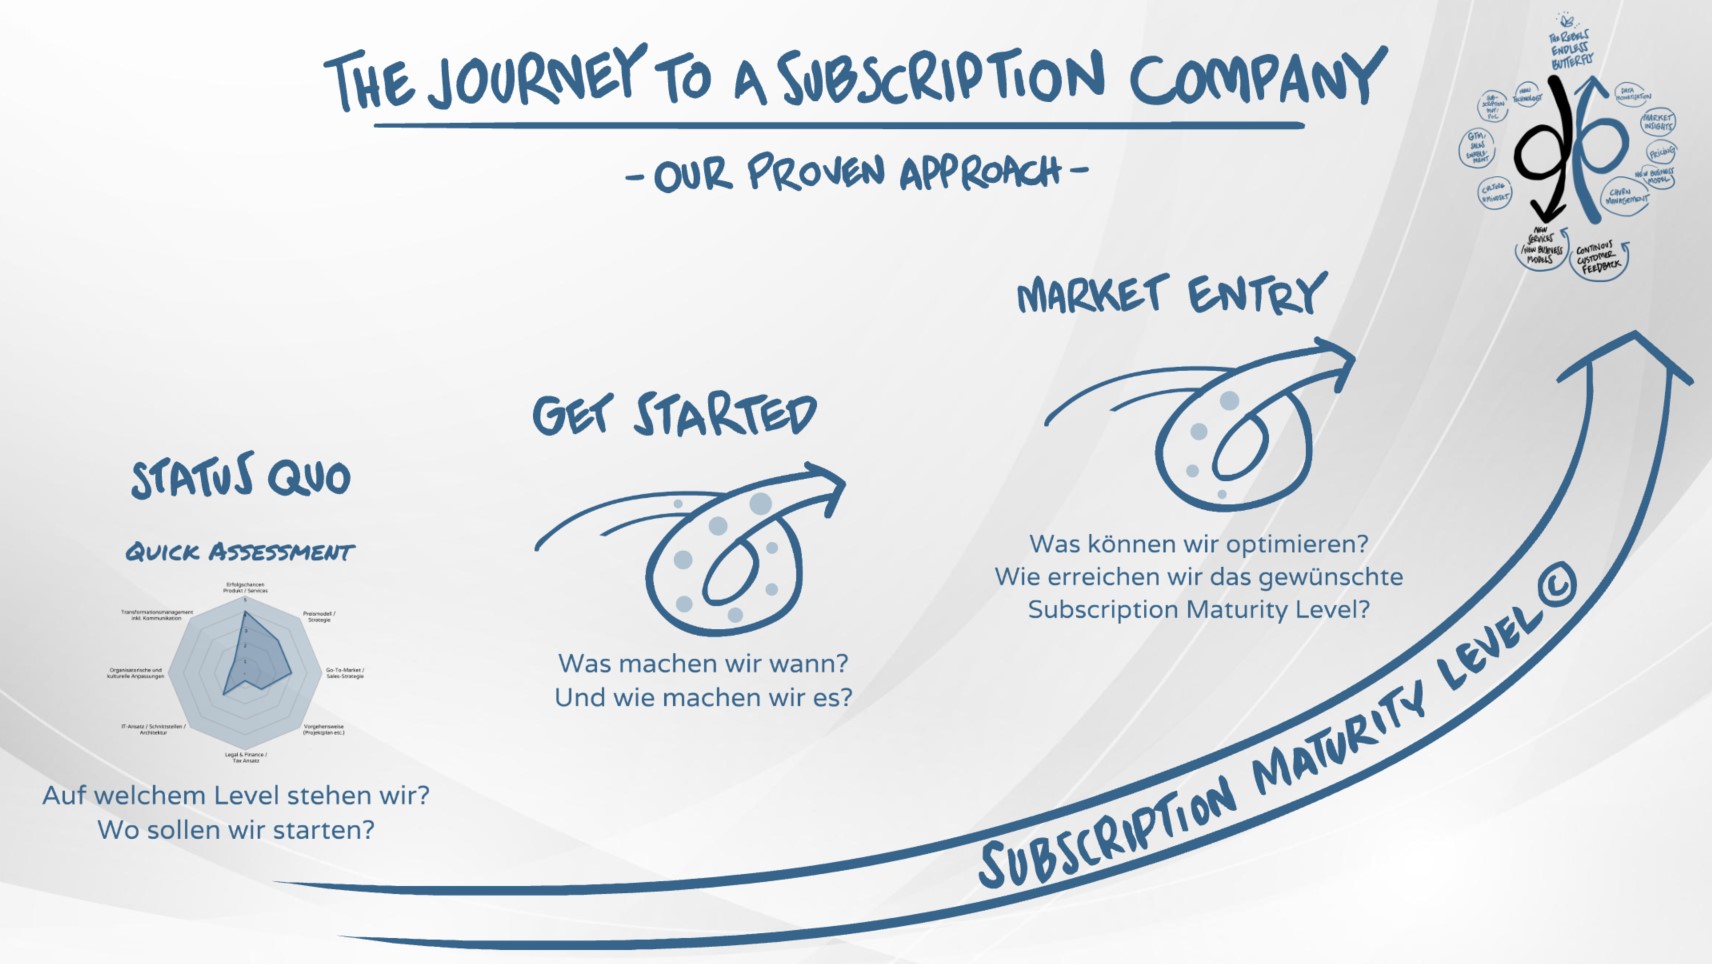 The Journey to a Subscription Company